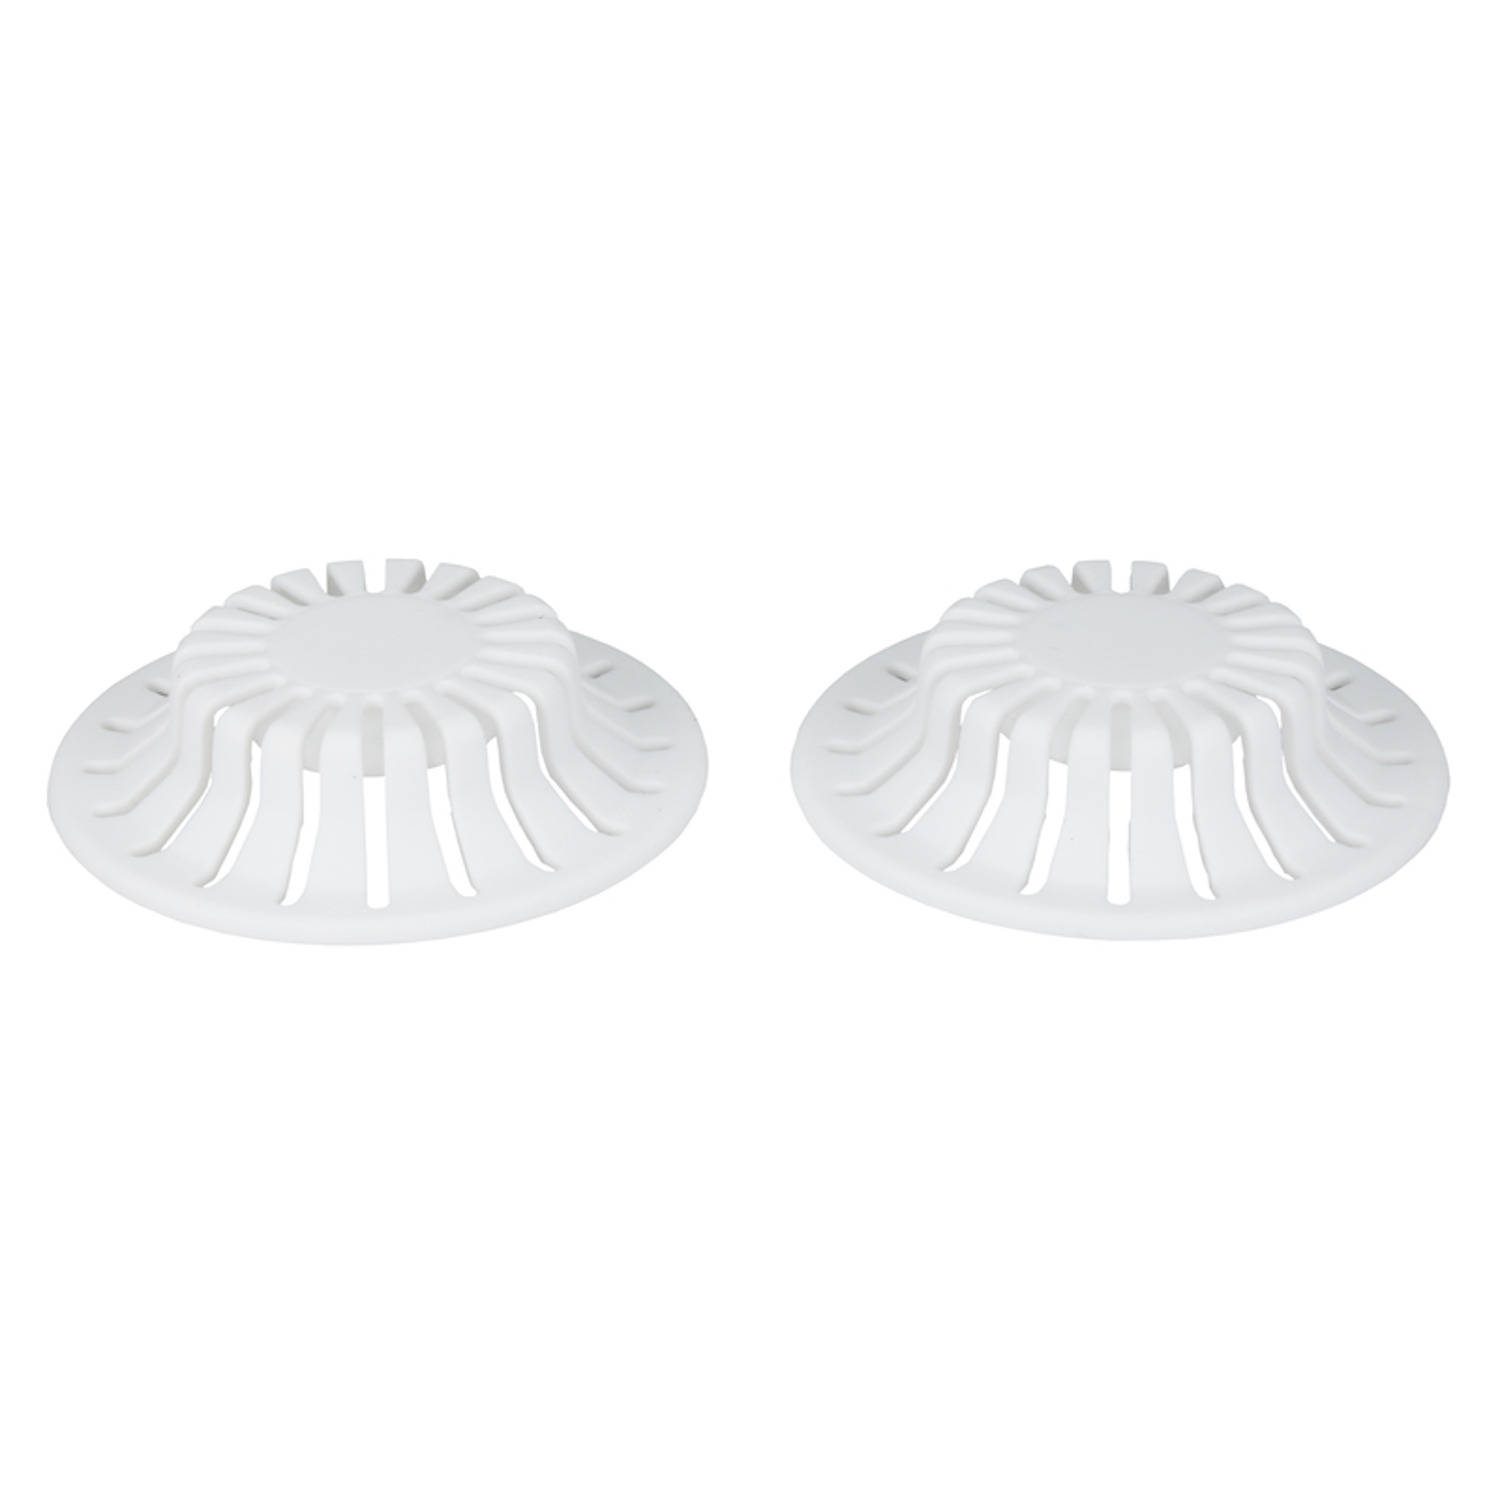 TubShroom Matte Silicone Hair Catcher - Ace Hardware